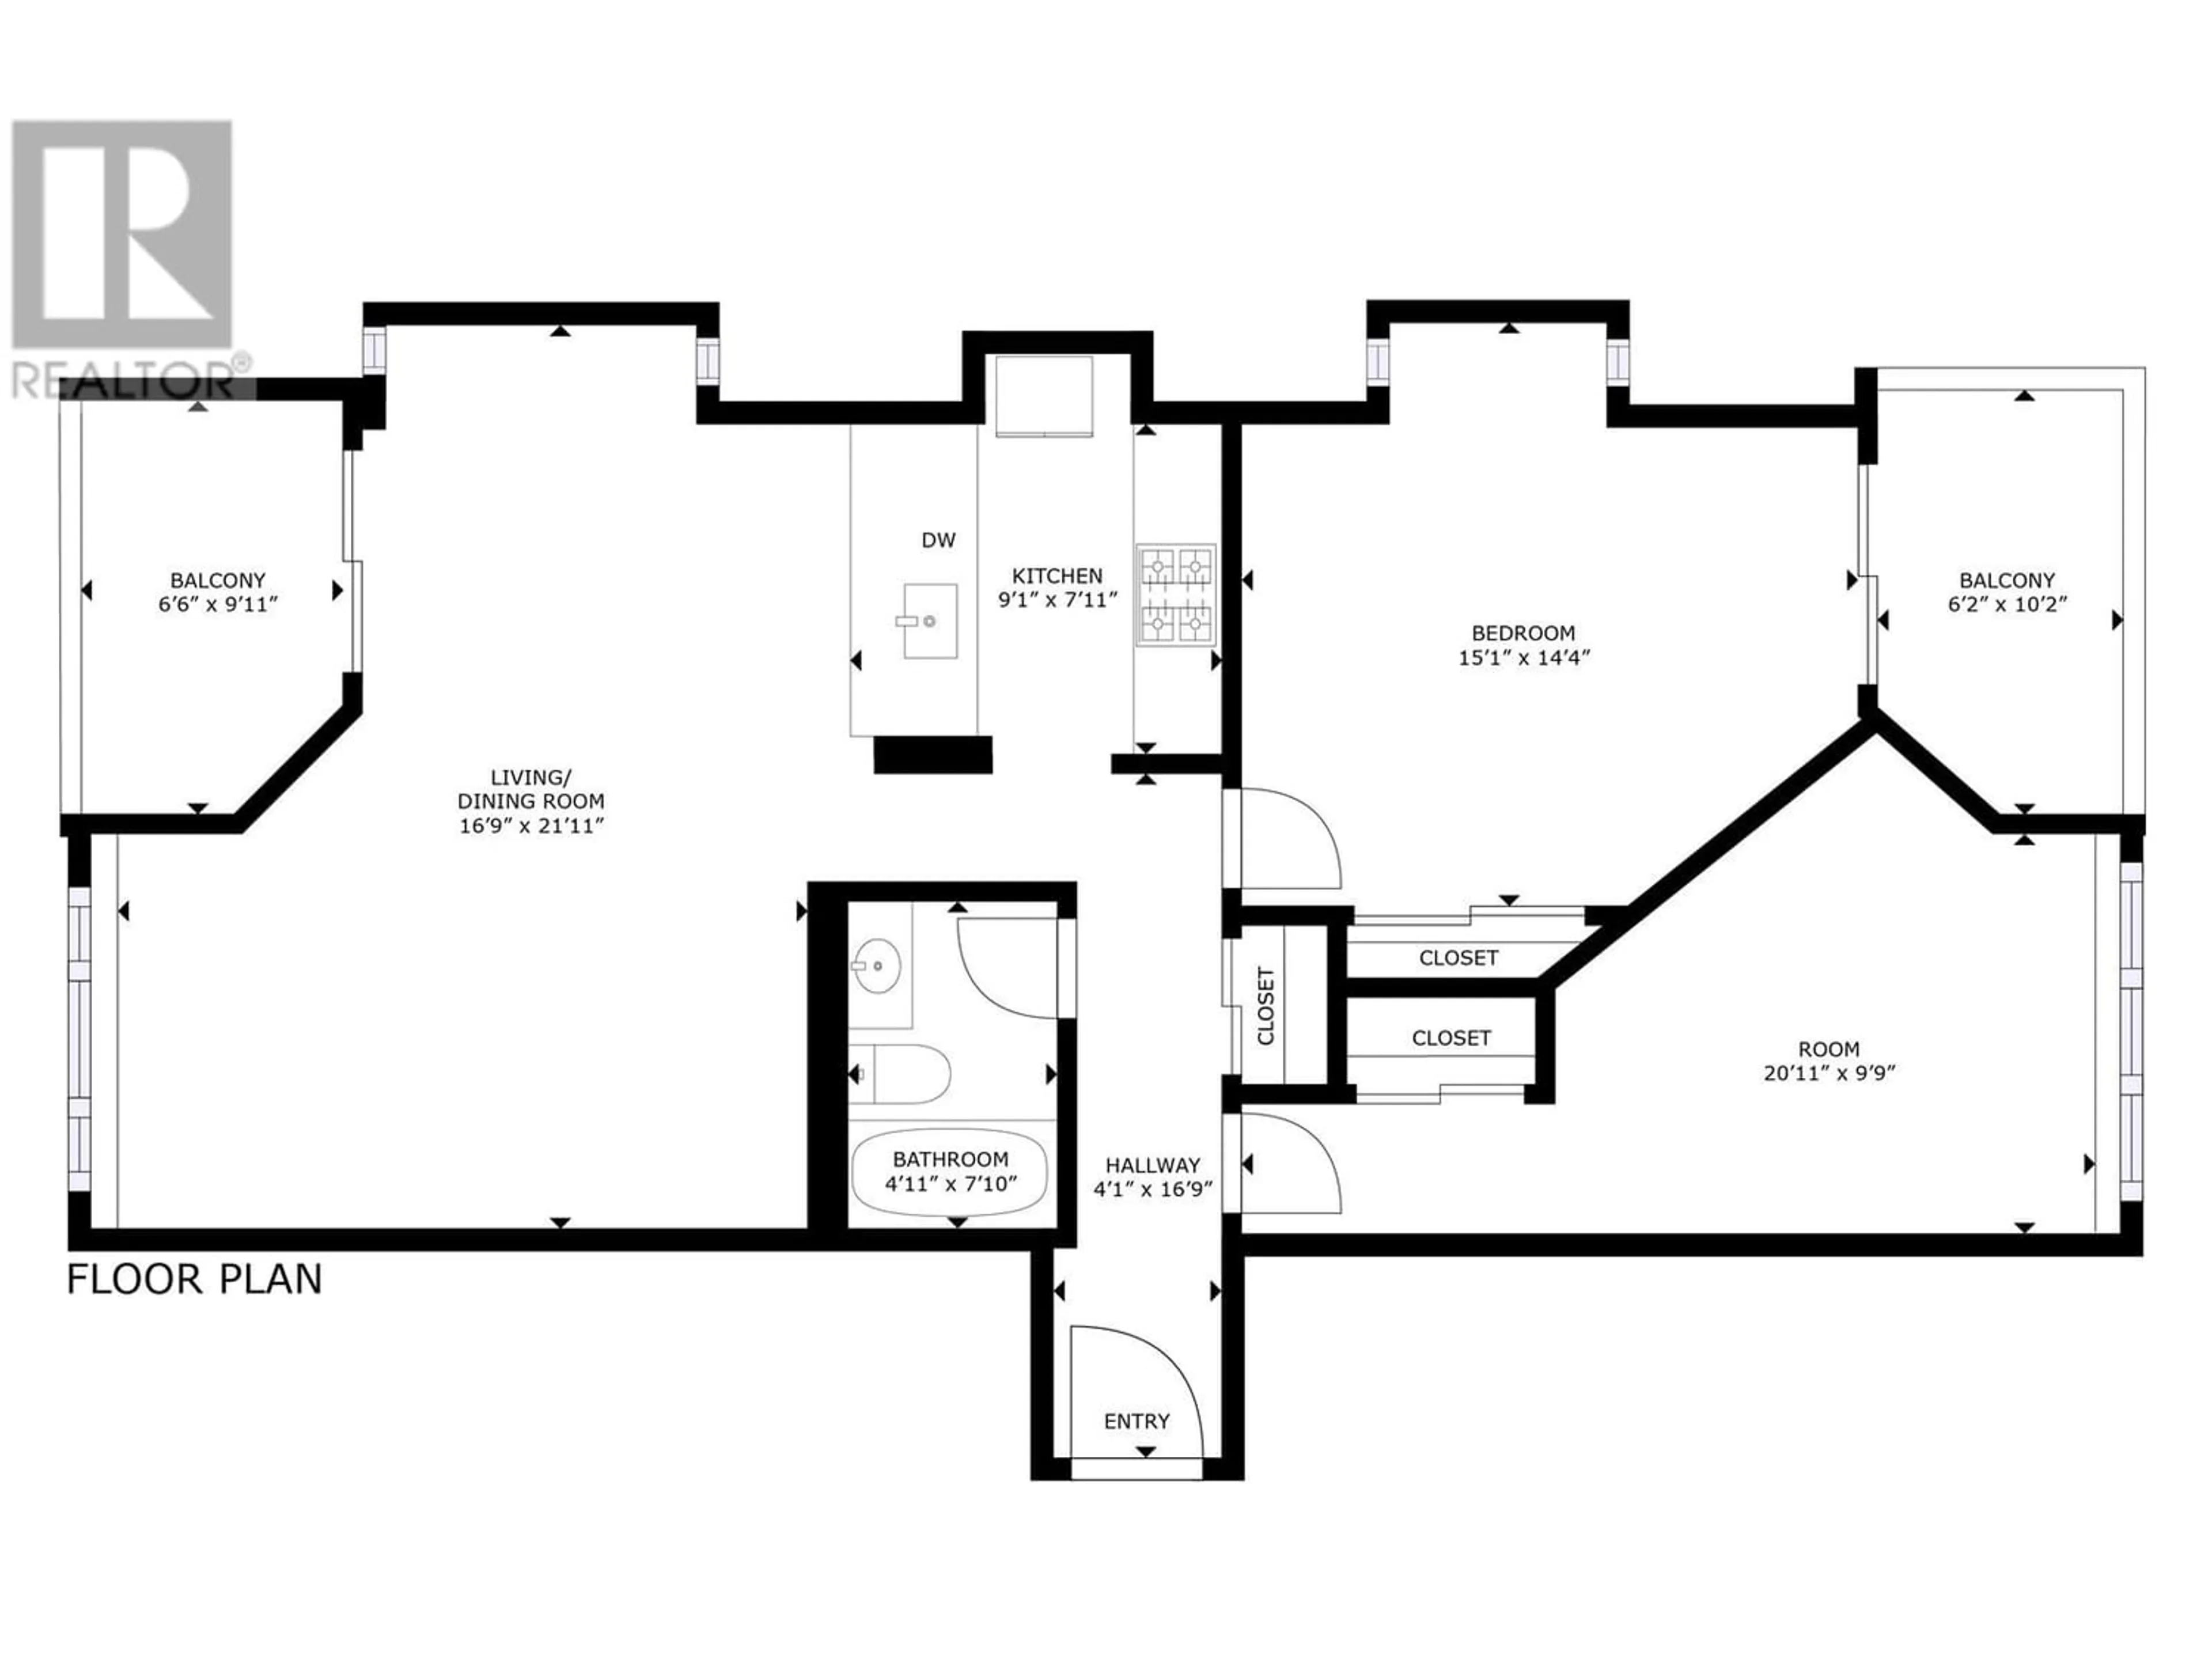 Floor plan for 602 1270 ROBSON STREET, Vancouver British Columbia V6E3Z6